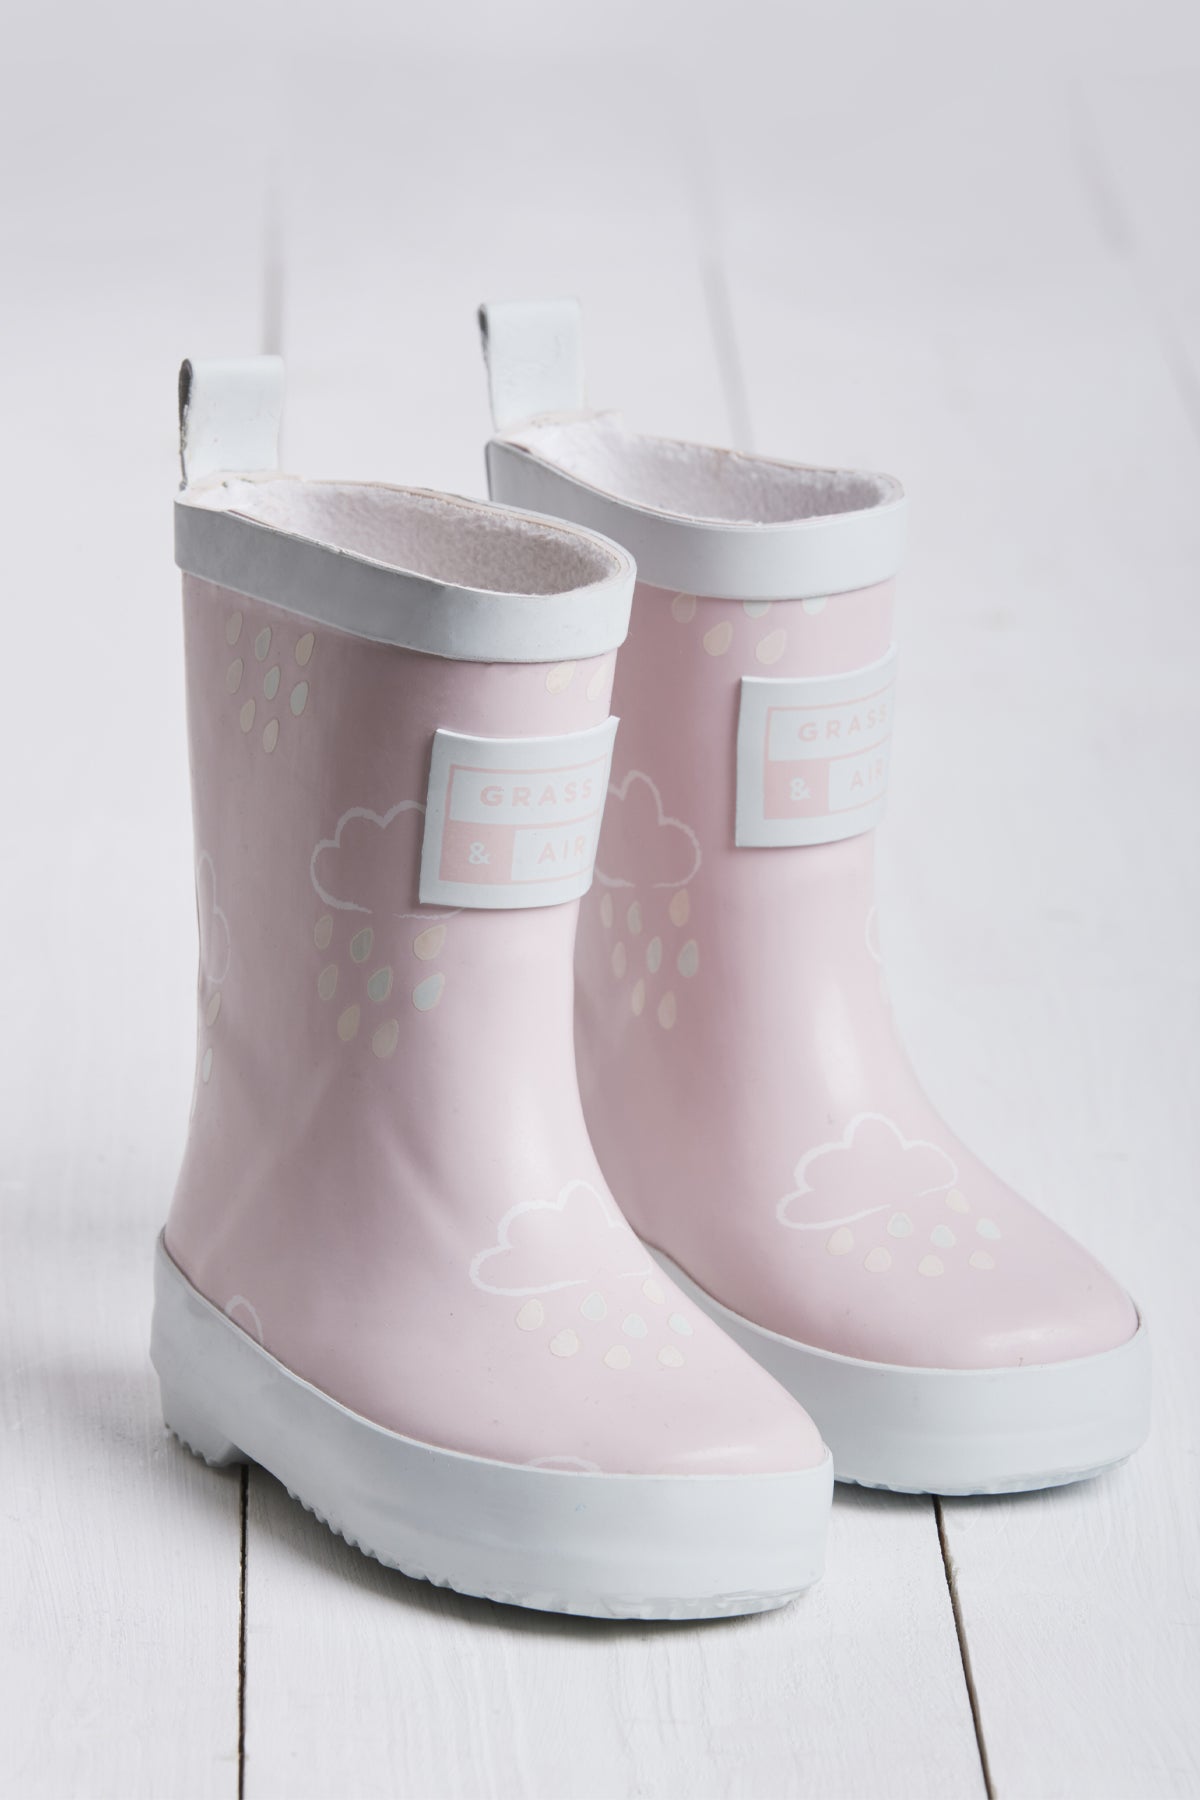 GRASS & AIR - Infant Colour Changing Wellies in Baby Pink